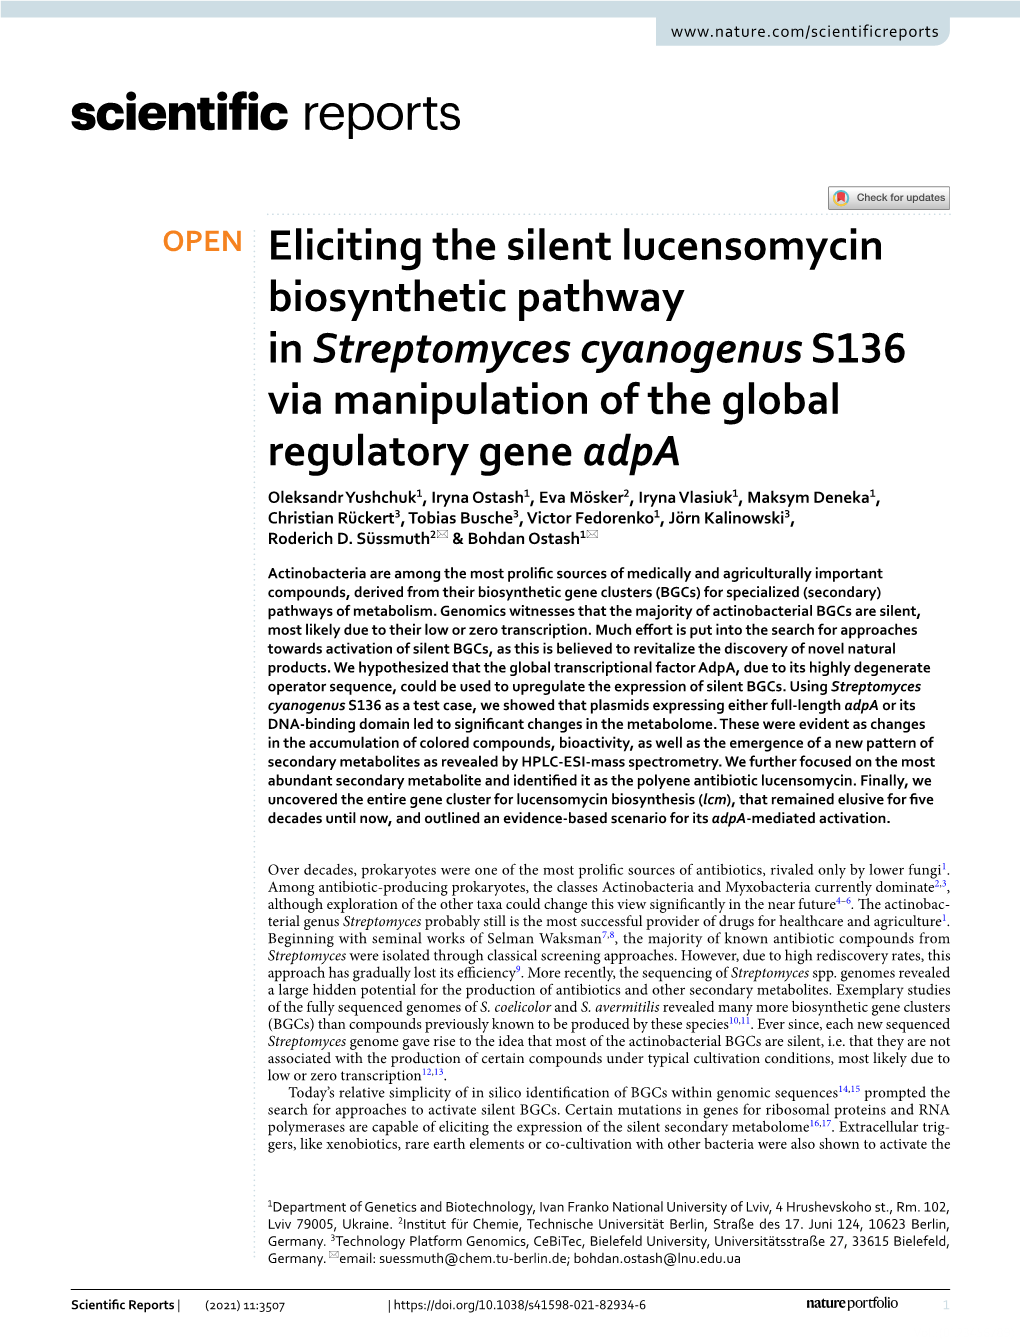 Eliciting the Silent Lucensomycin Biosynthetic Pathway In